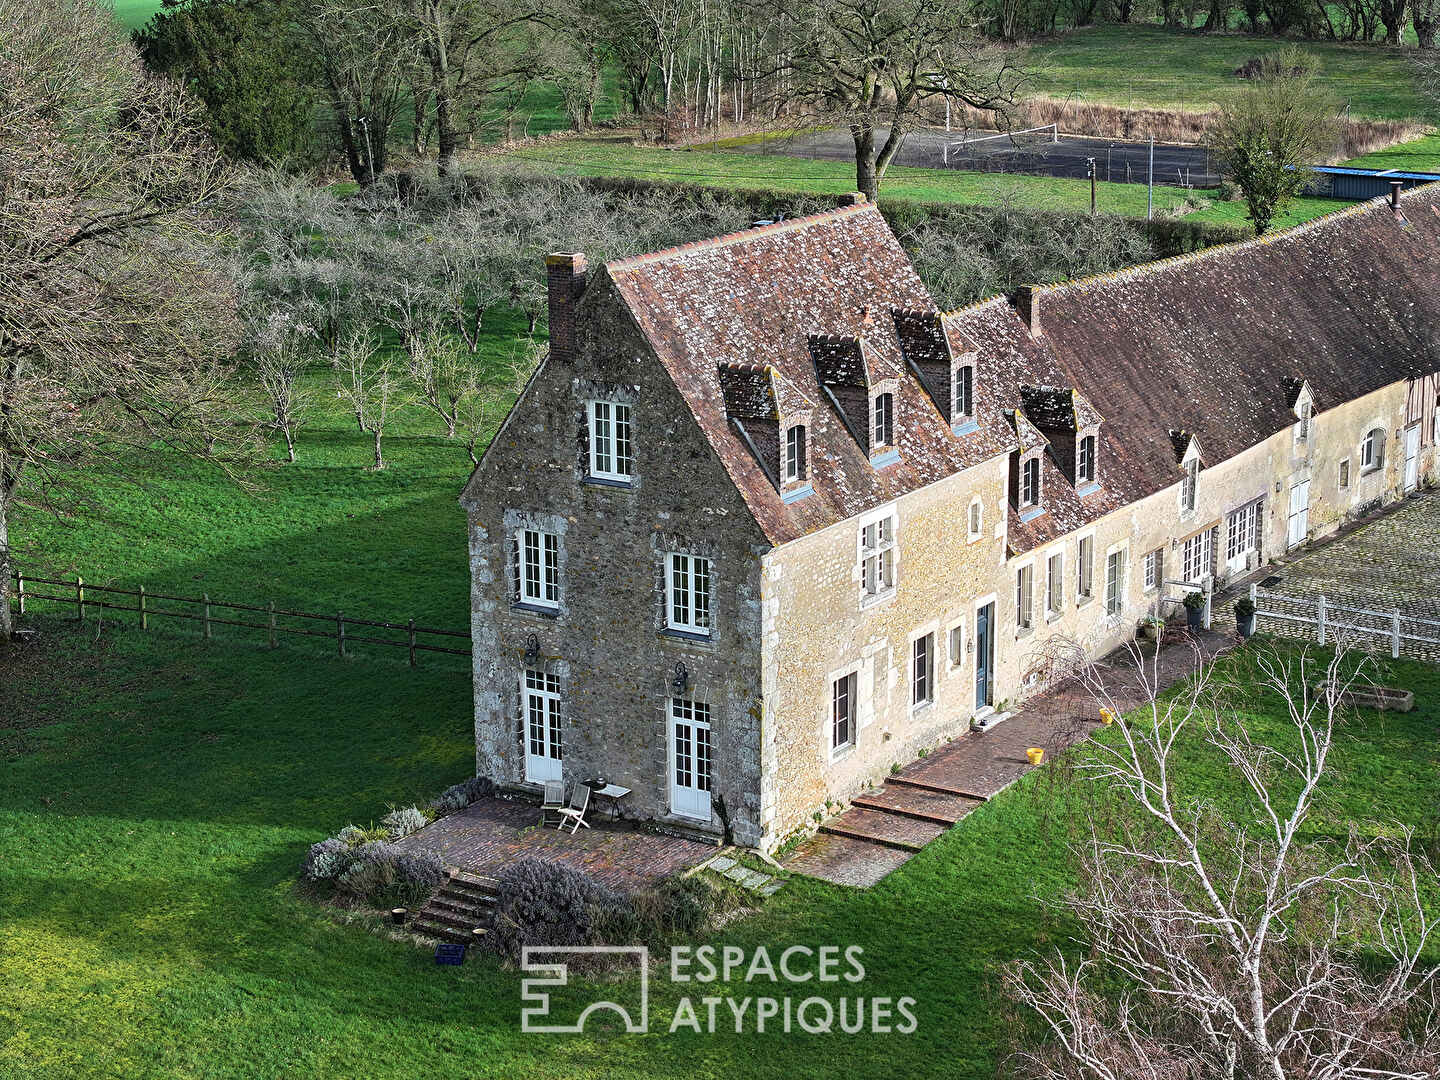 15th century manor house in the Perche countryside